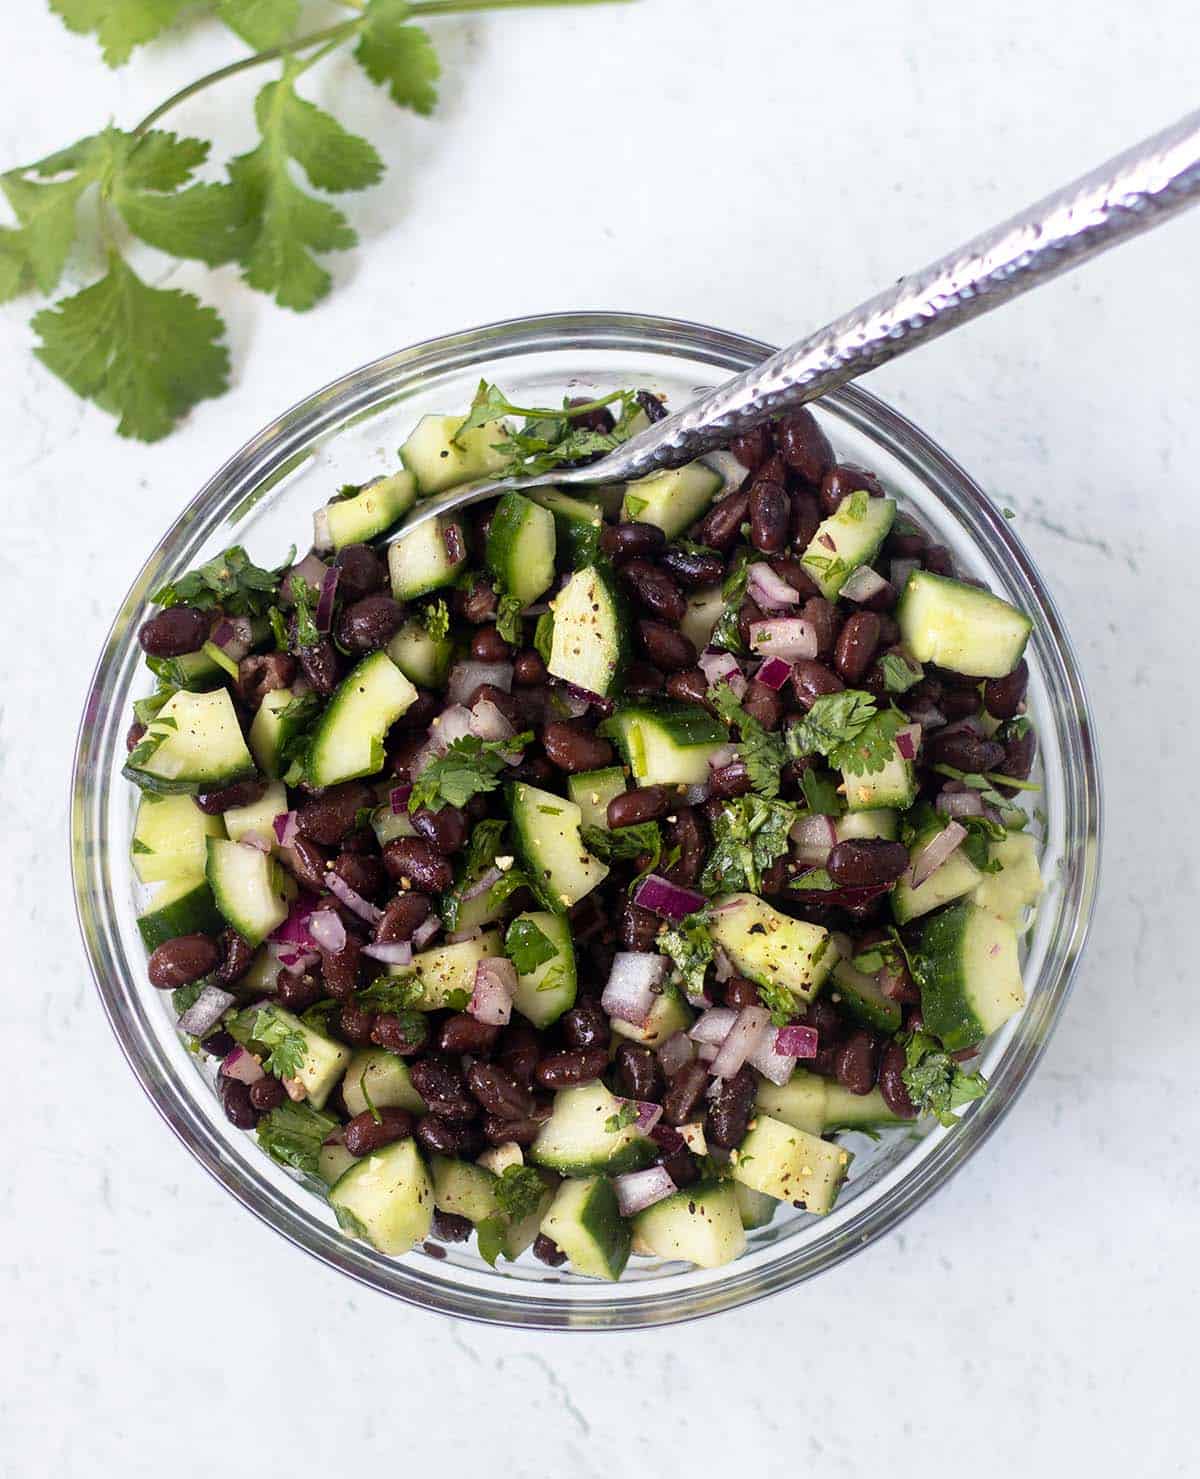 cucumber black bean salad in a clear glass bowl with a silver spoon for serving. Cilantro leaves in the background.